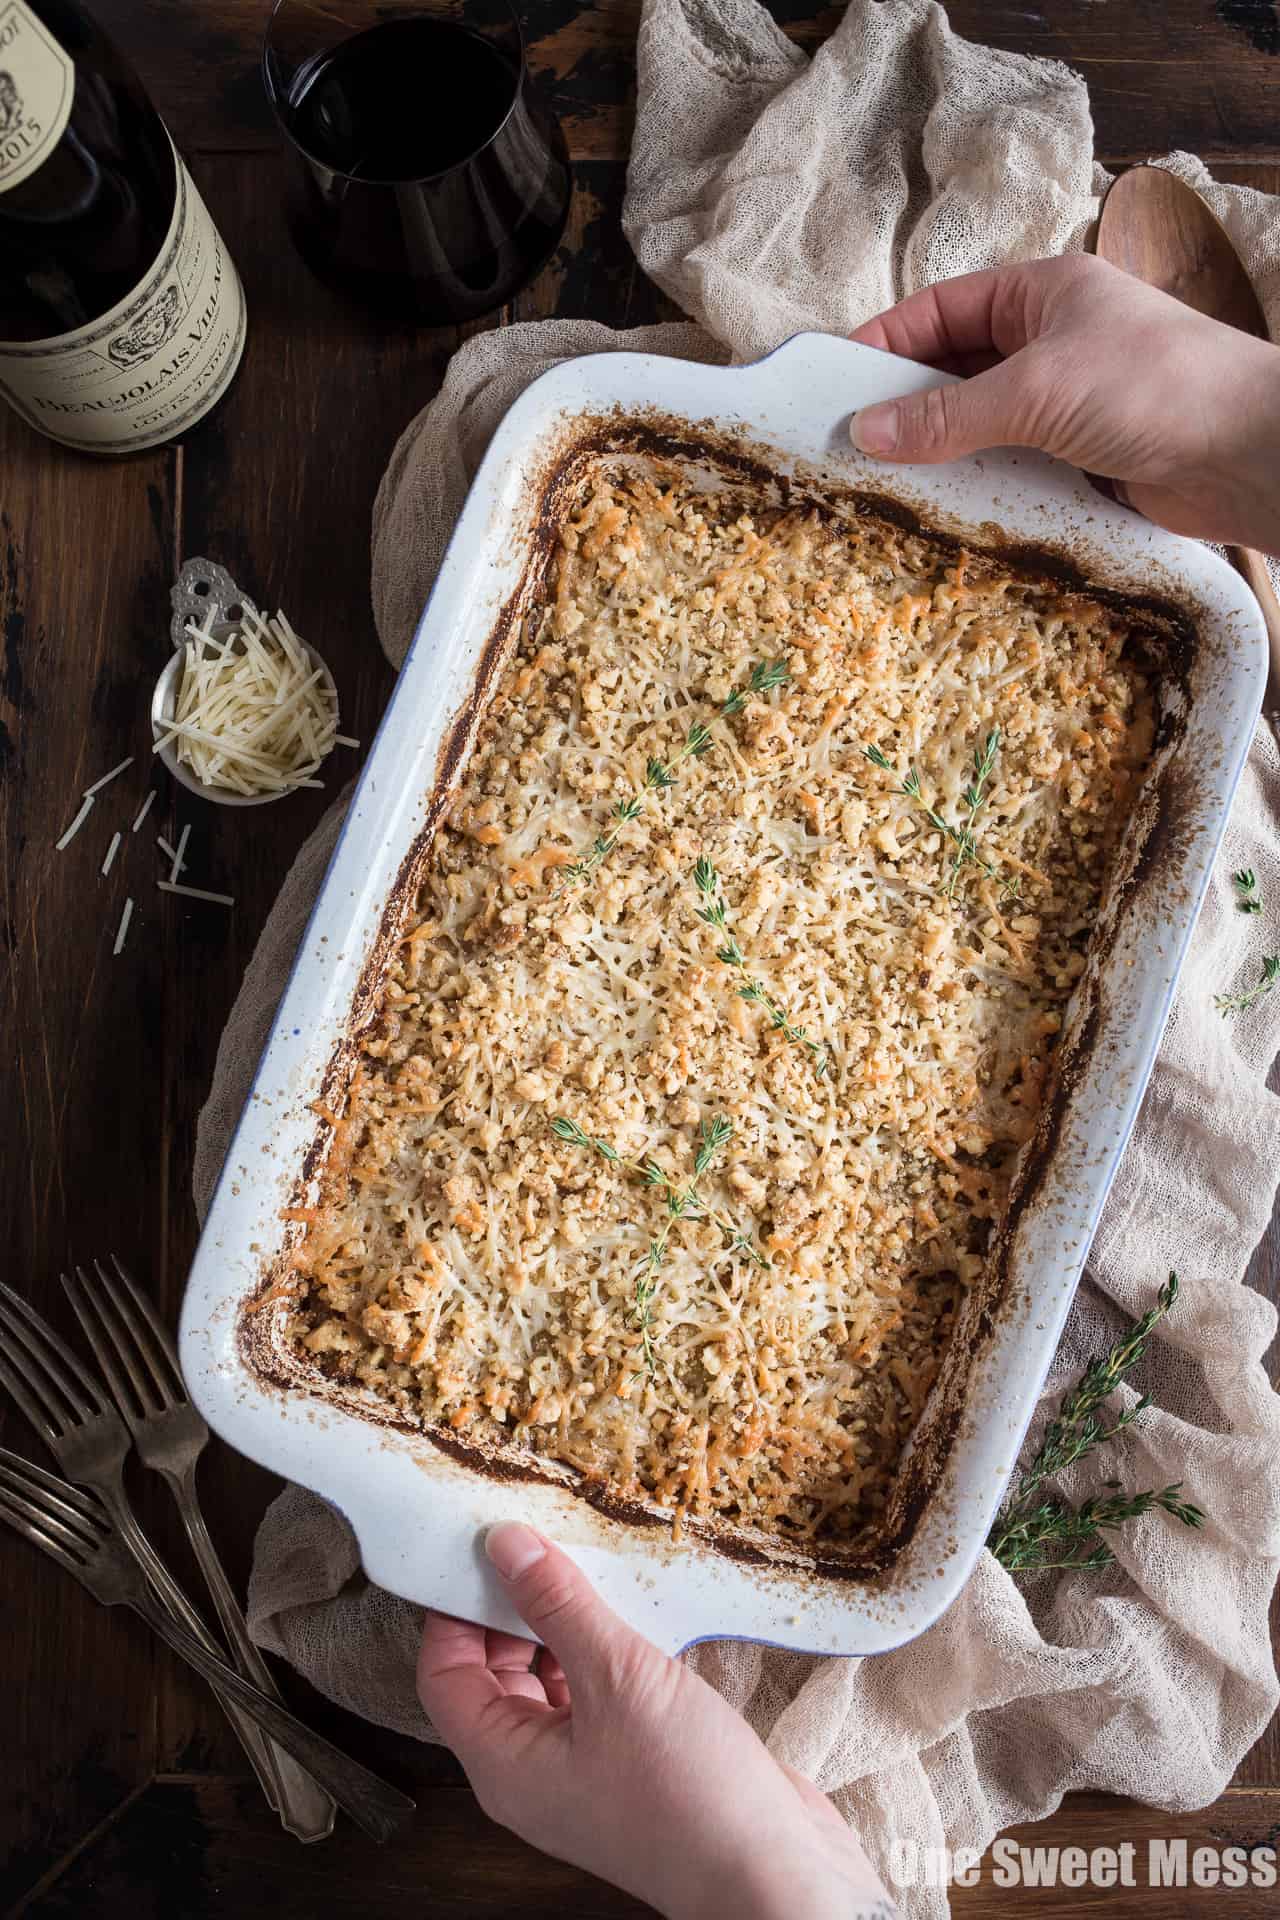 Potato Leek Gratin: This creamy spring side dish is loaded with cheese and topped with a toasted walnut crumble.